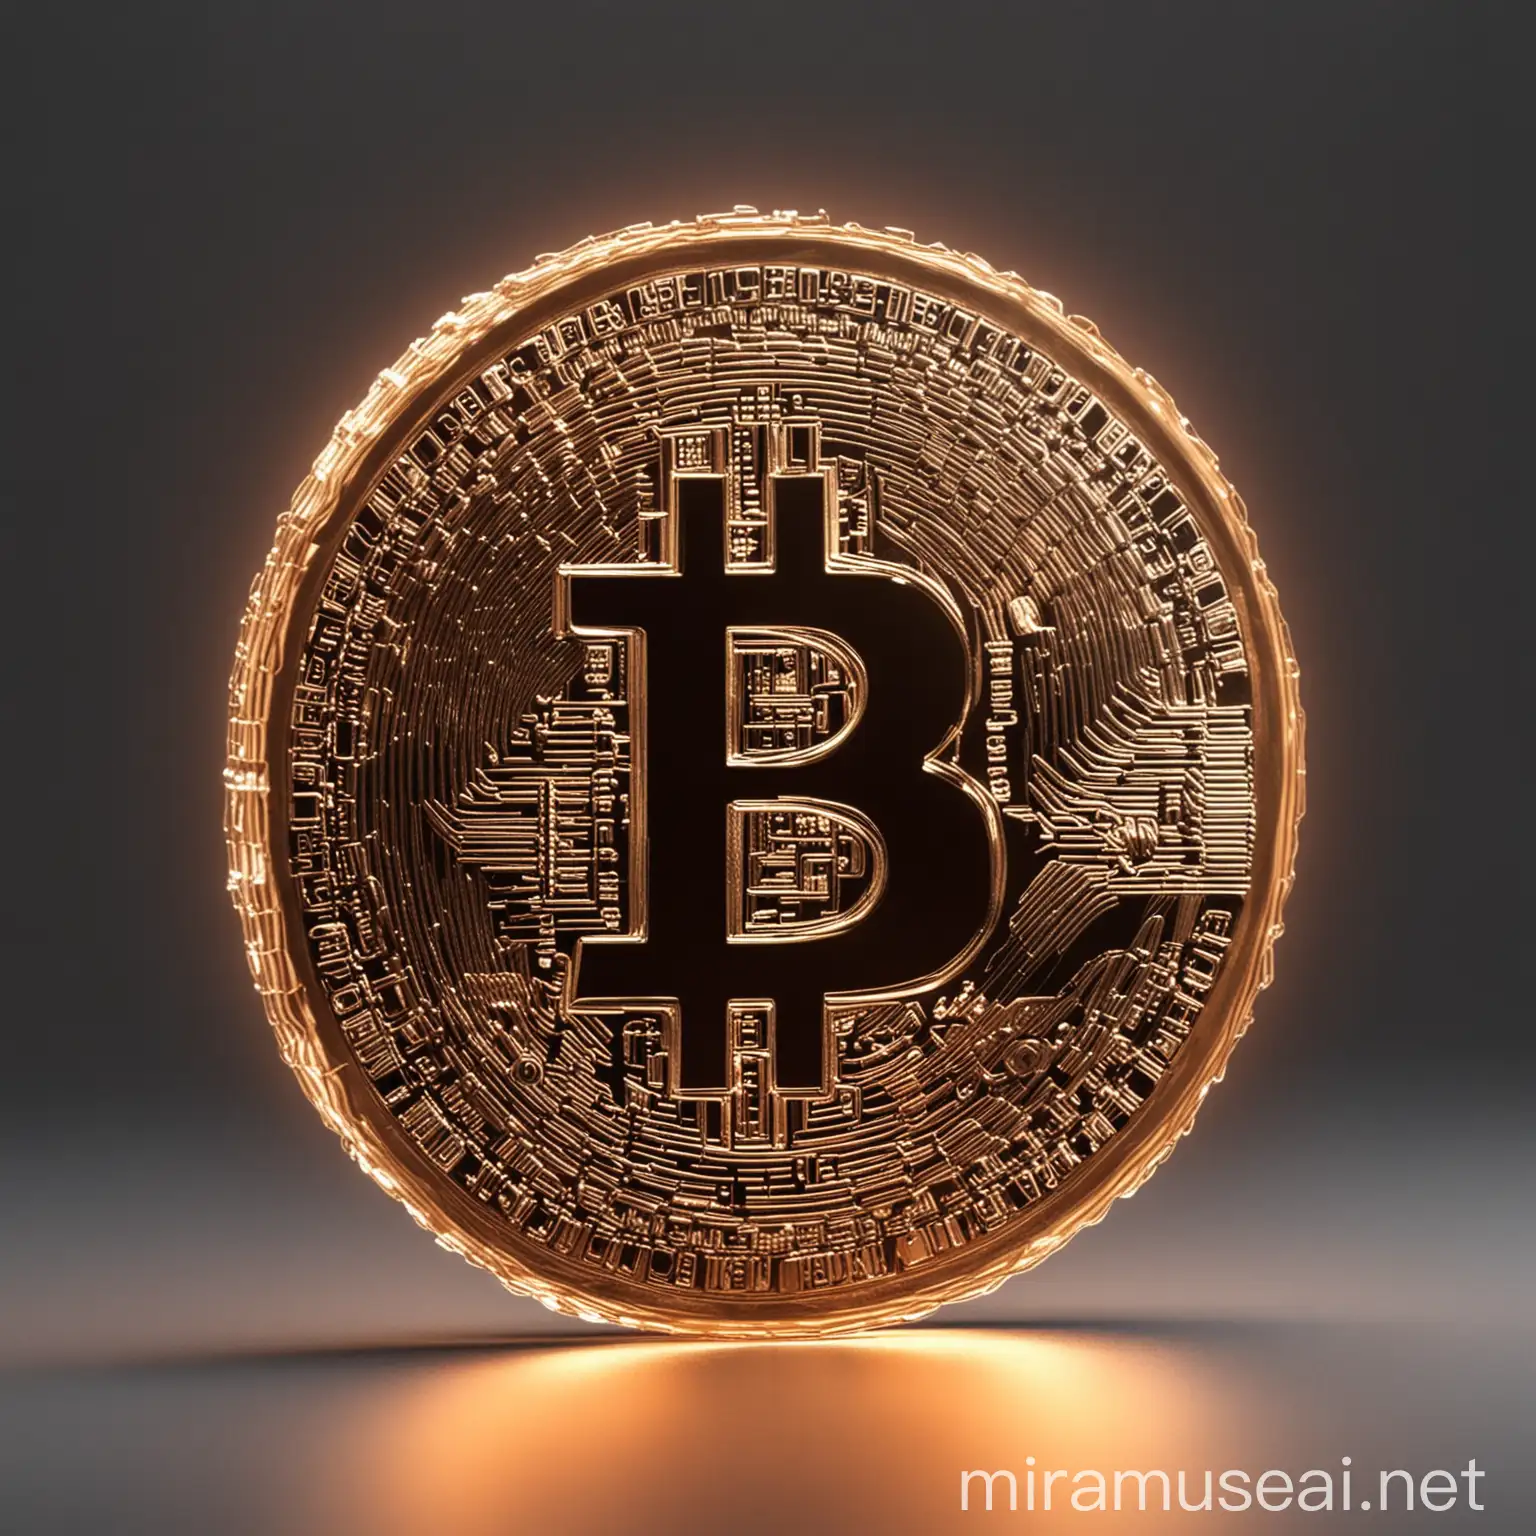 Bitcoin coin that is electric and lights up